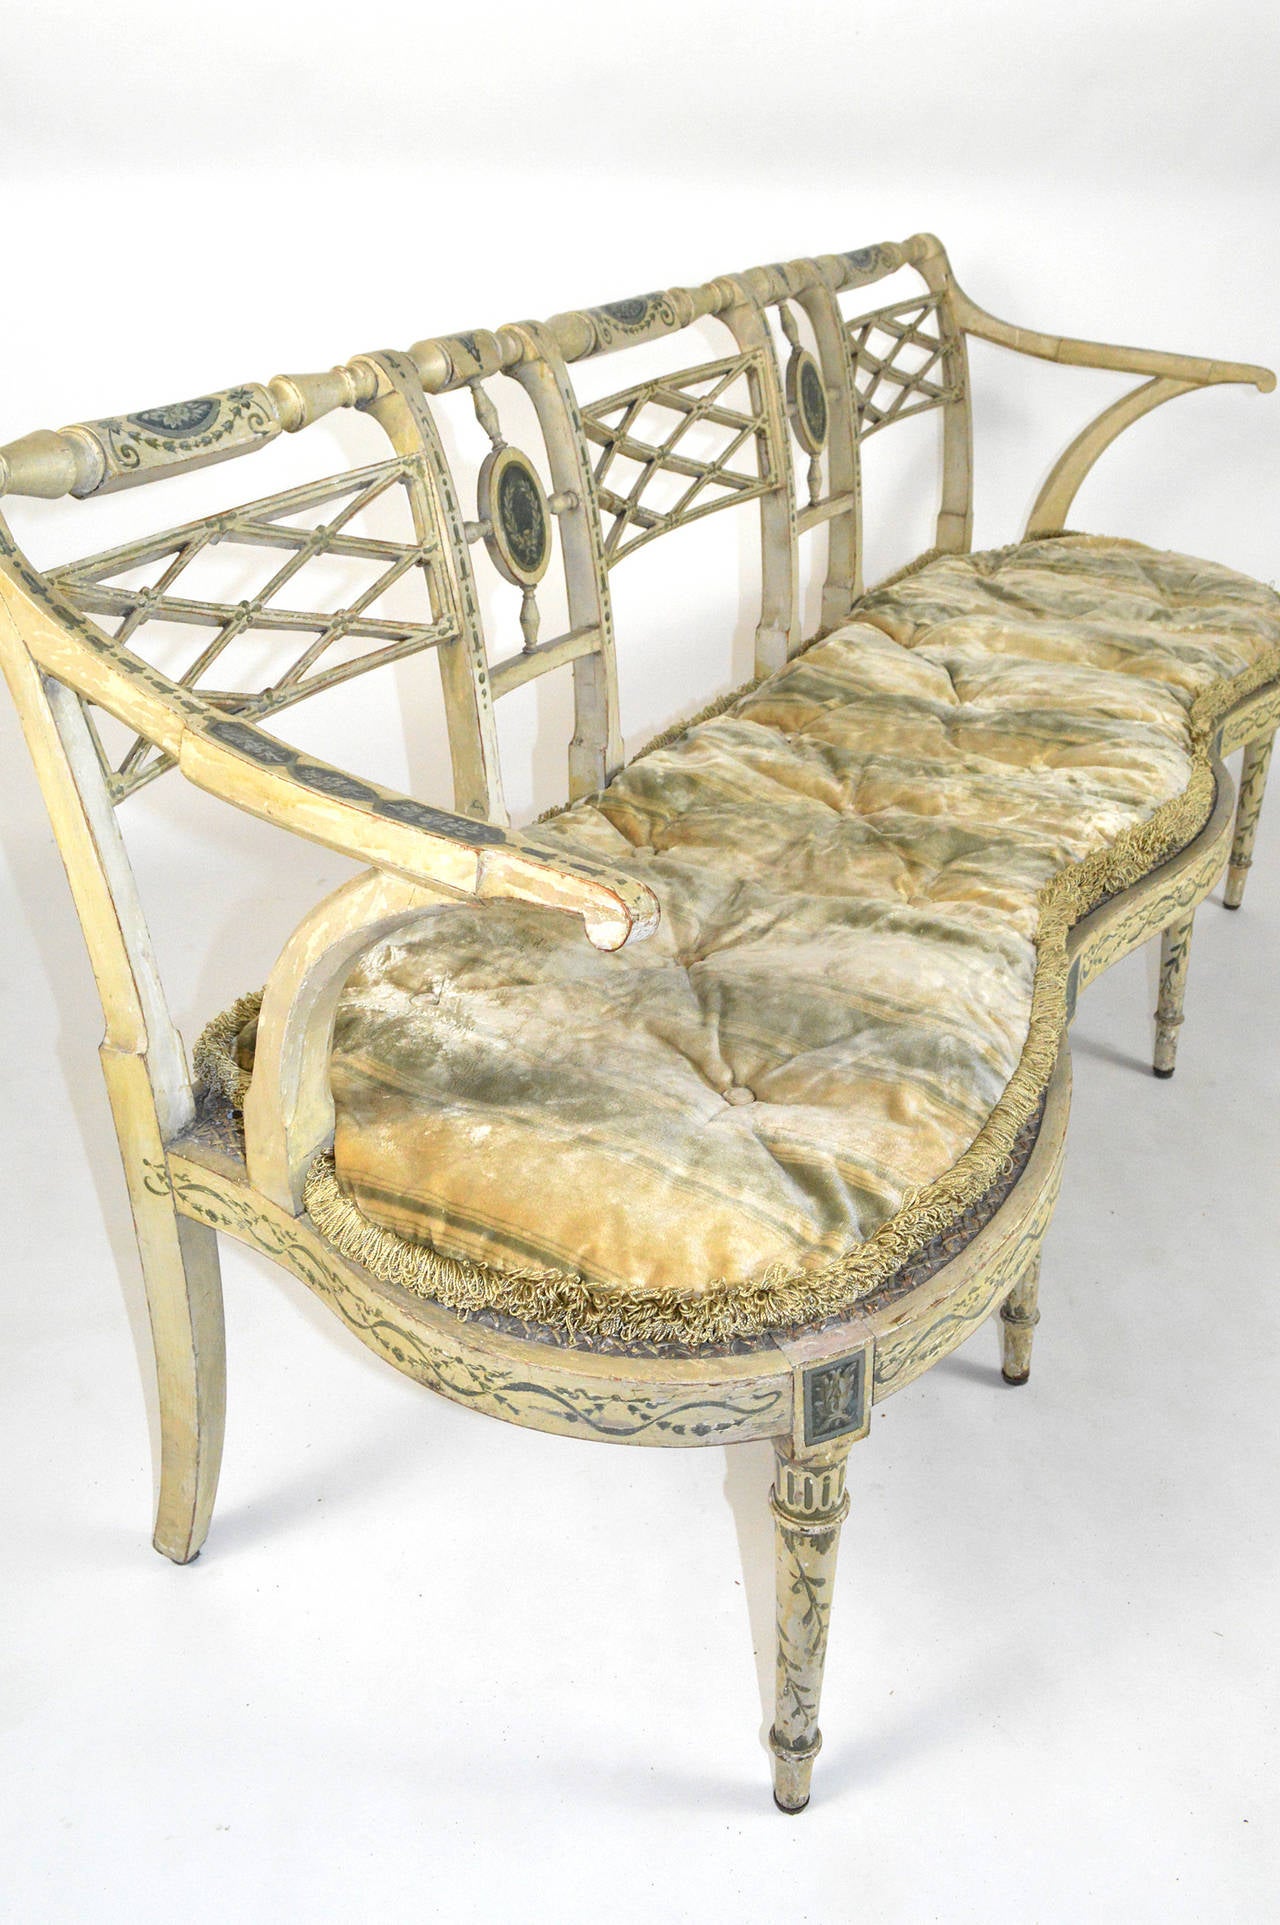 Neoclassical Style Three-Seat Painted Settee, 19th Century For Sale 3